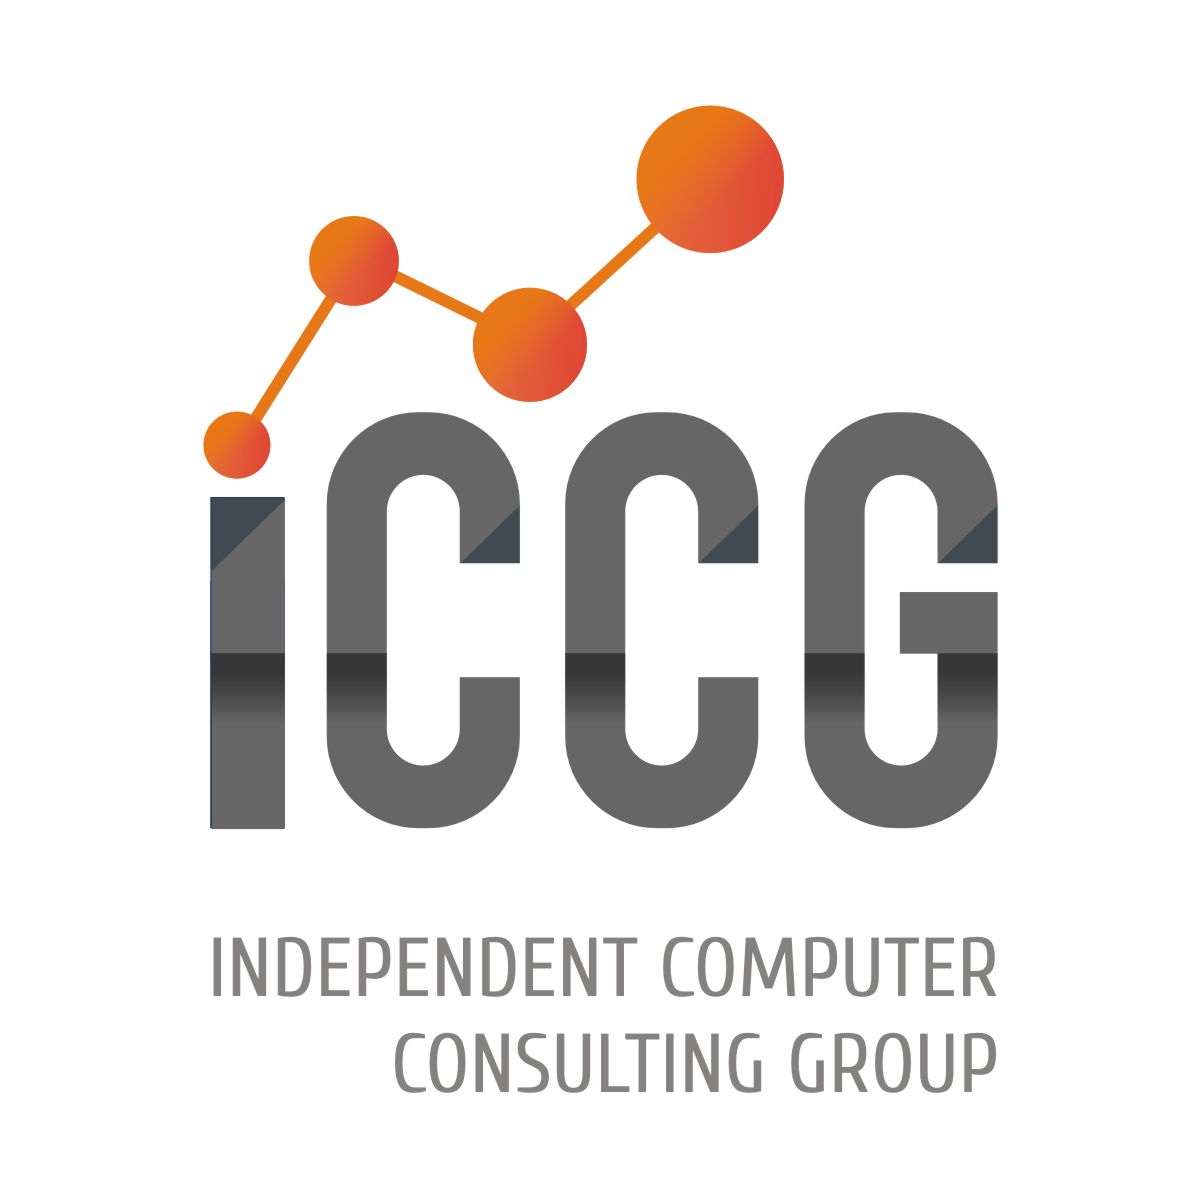 Independent Computer Consulting Group (ICCG) India Completes Major Implementation of Infor M3 ERP Software for RSWM Ltd. – An LNJ Bhilwara Group Company